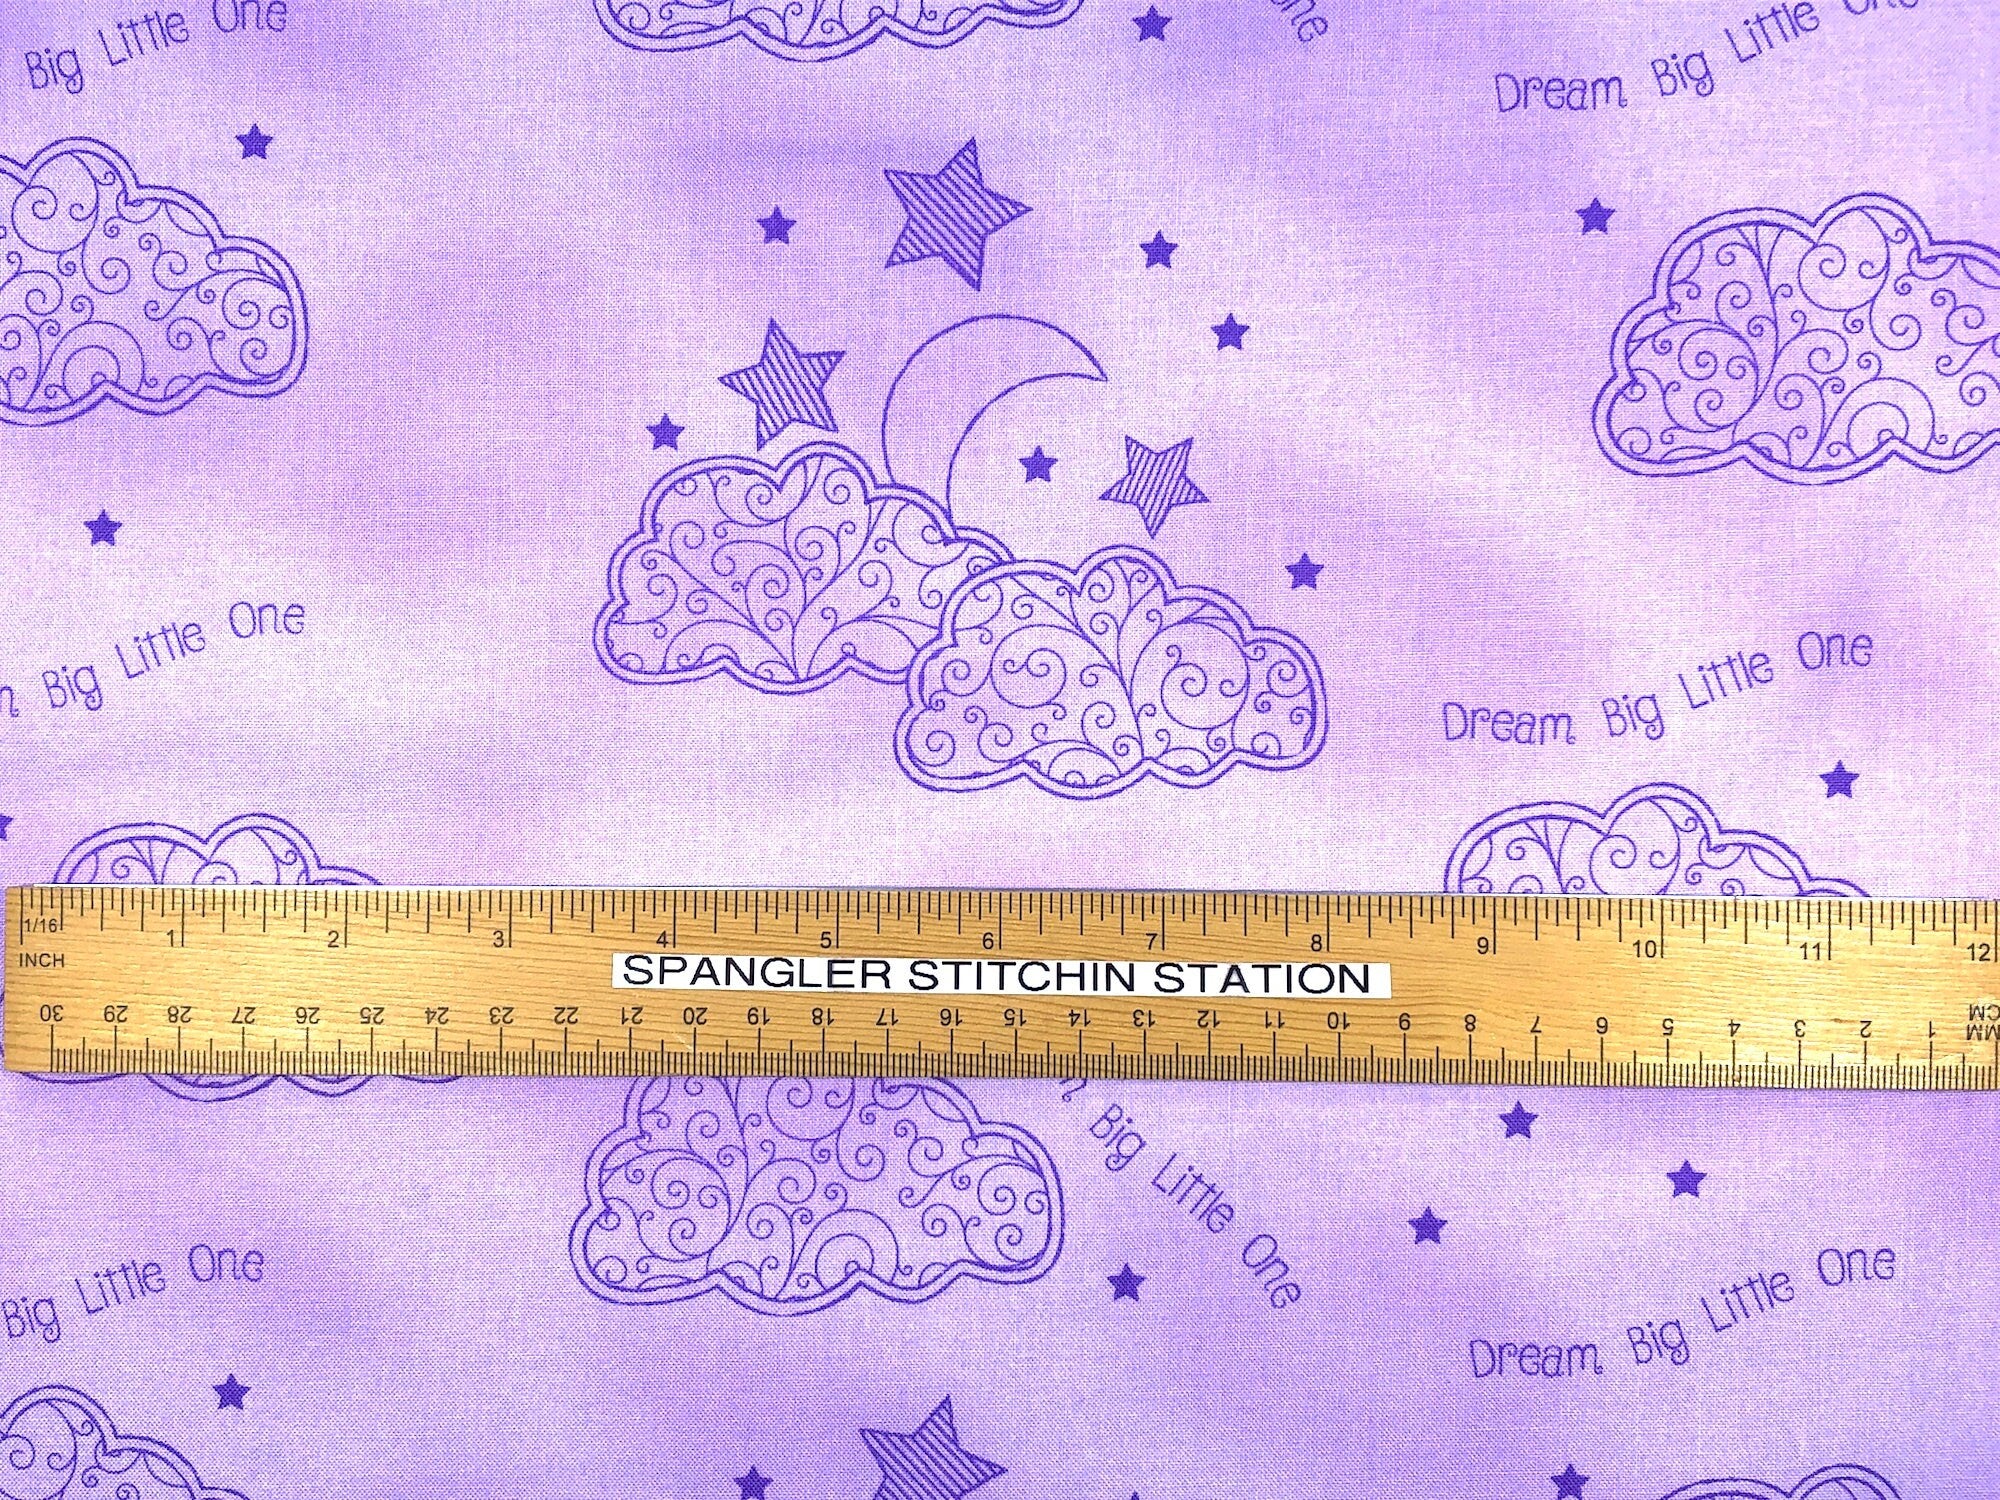 Ruler on fabric to show sizing